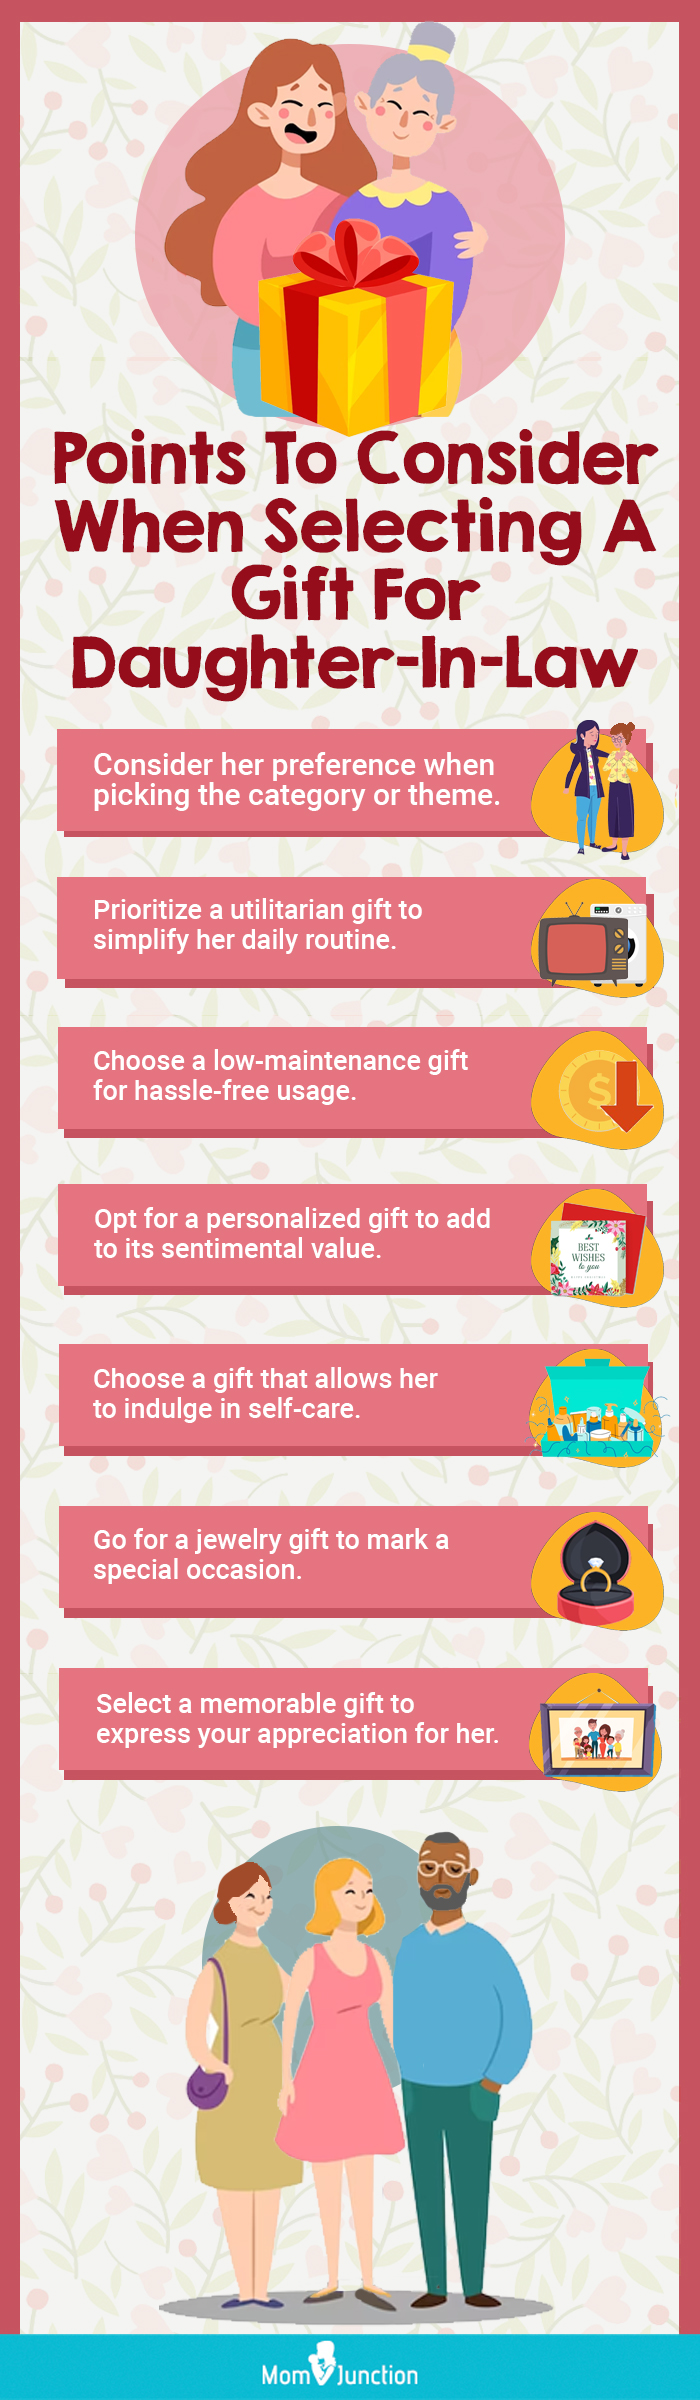 Points To Consider When Selecting A Gift For Daughter In Law copy (infographic)